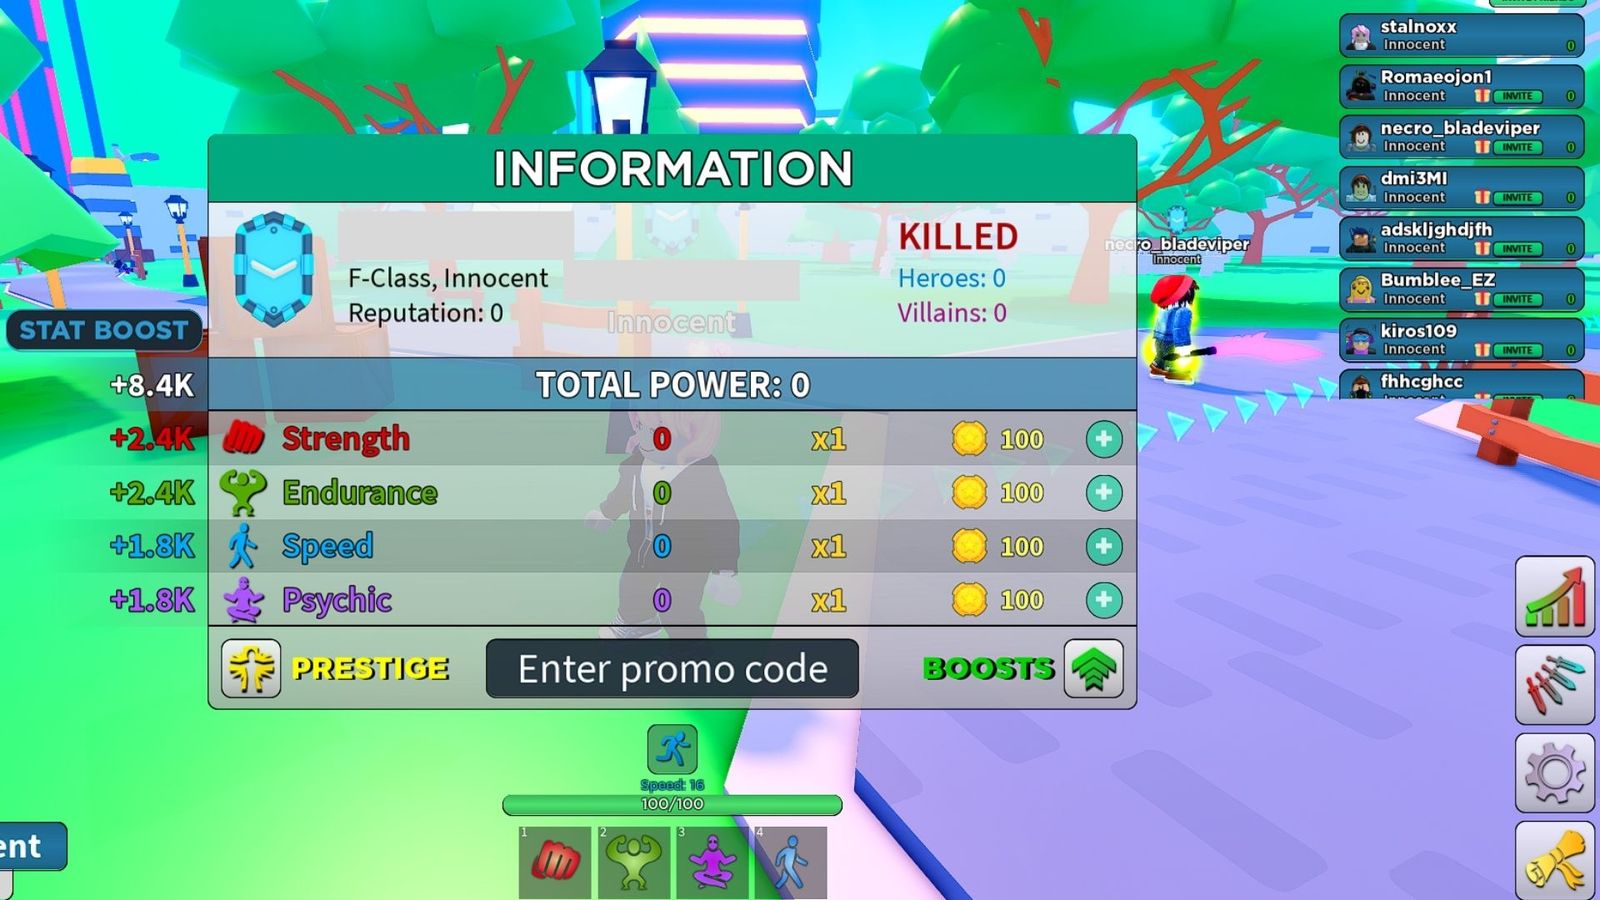 How to redeem codes in Hero Simulator on Roblox